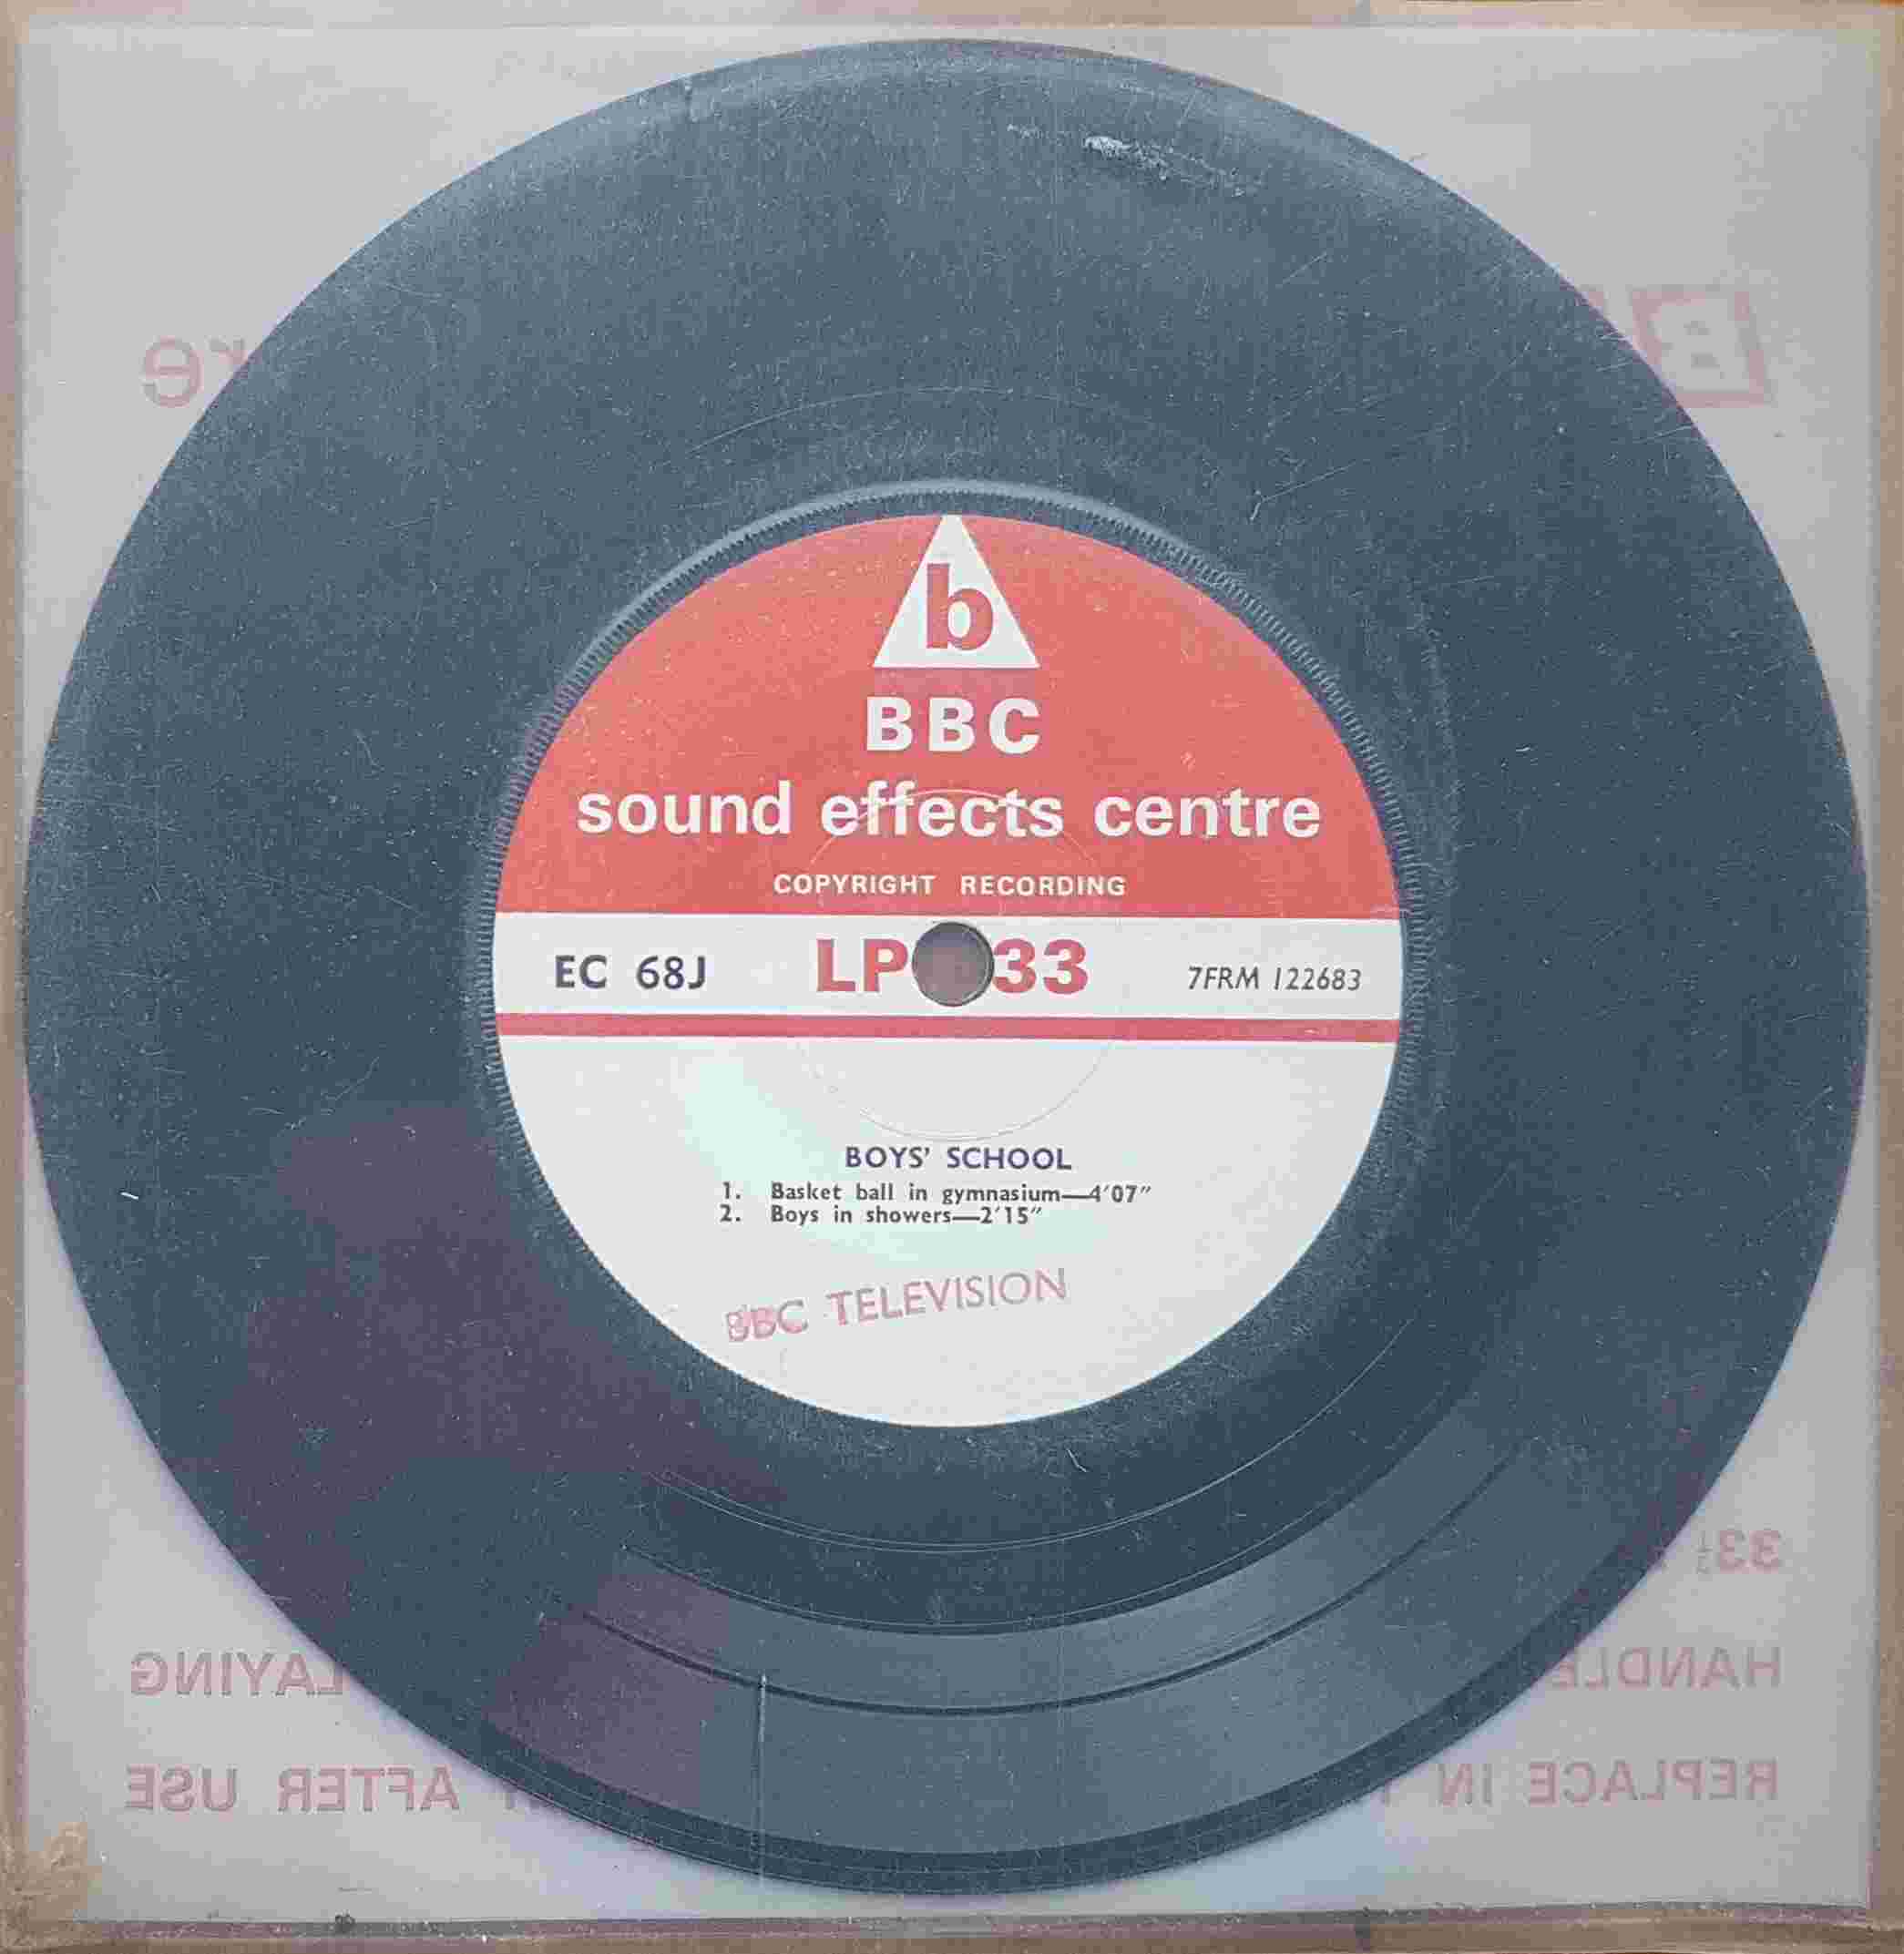 Picture of EC 68J Boy's school by artist Not registered from the BBC records and Tapes library